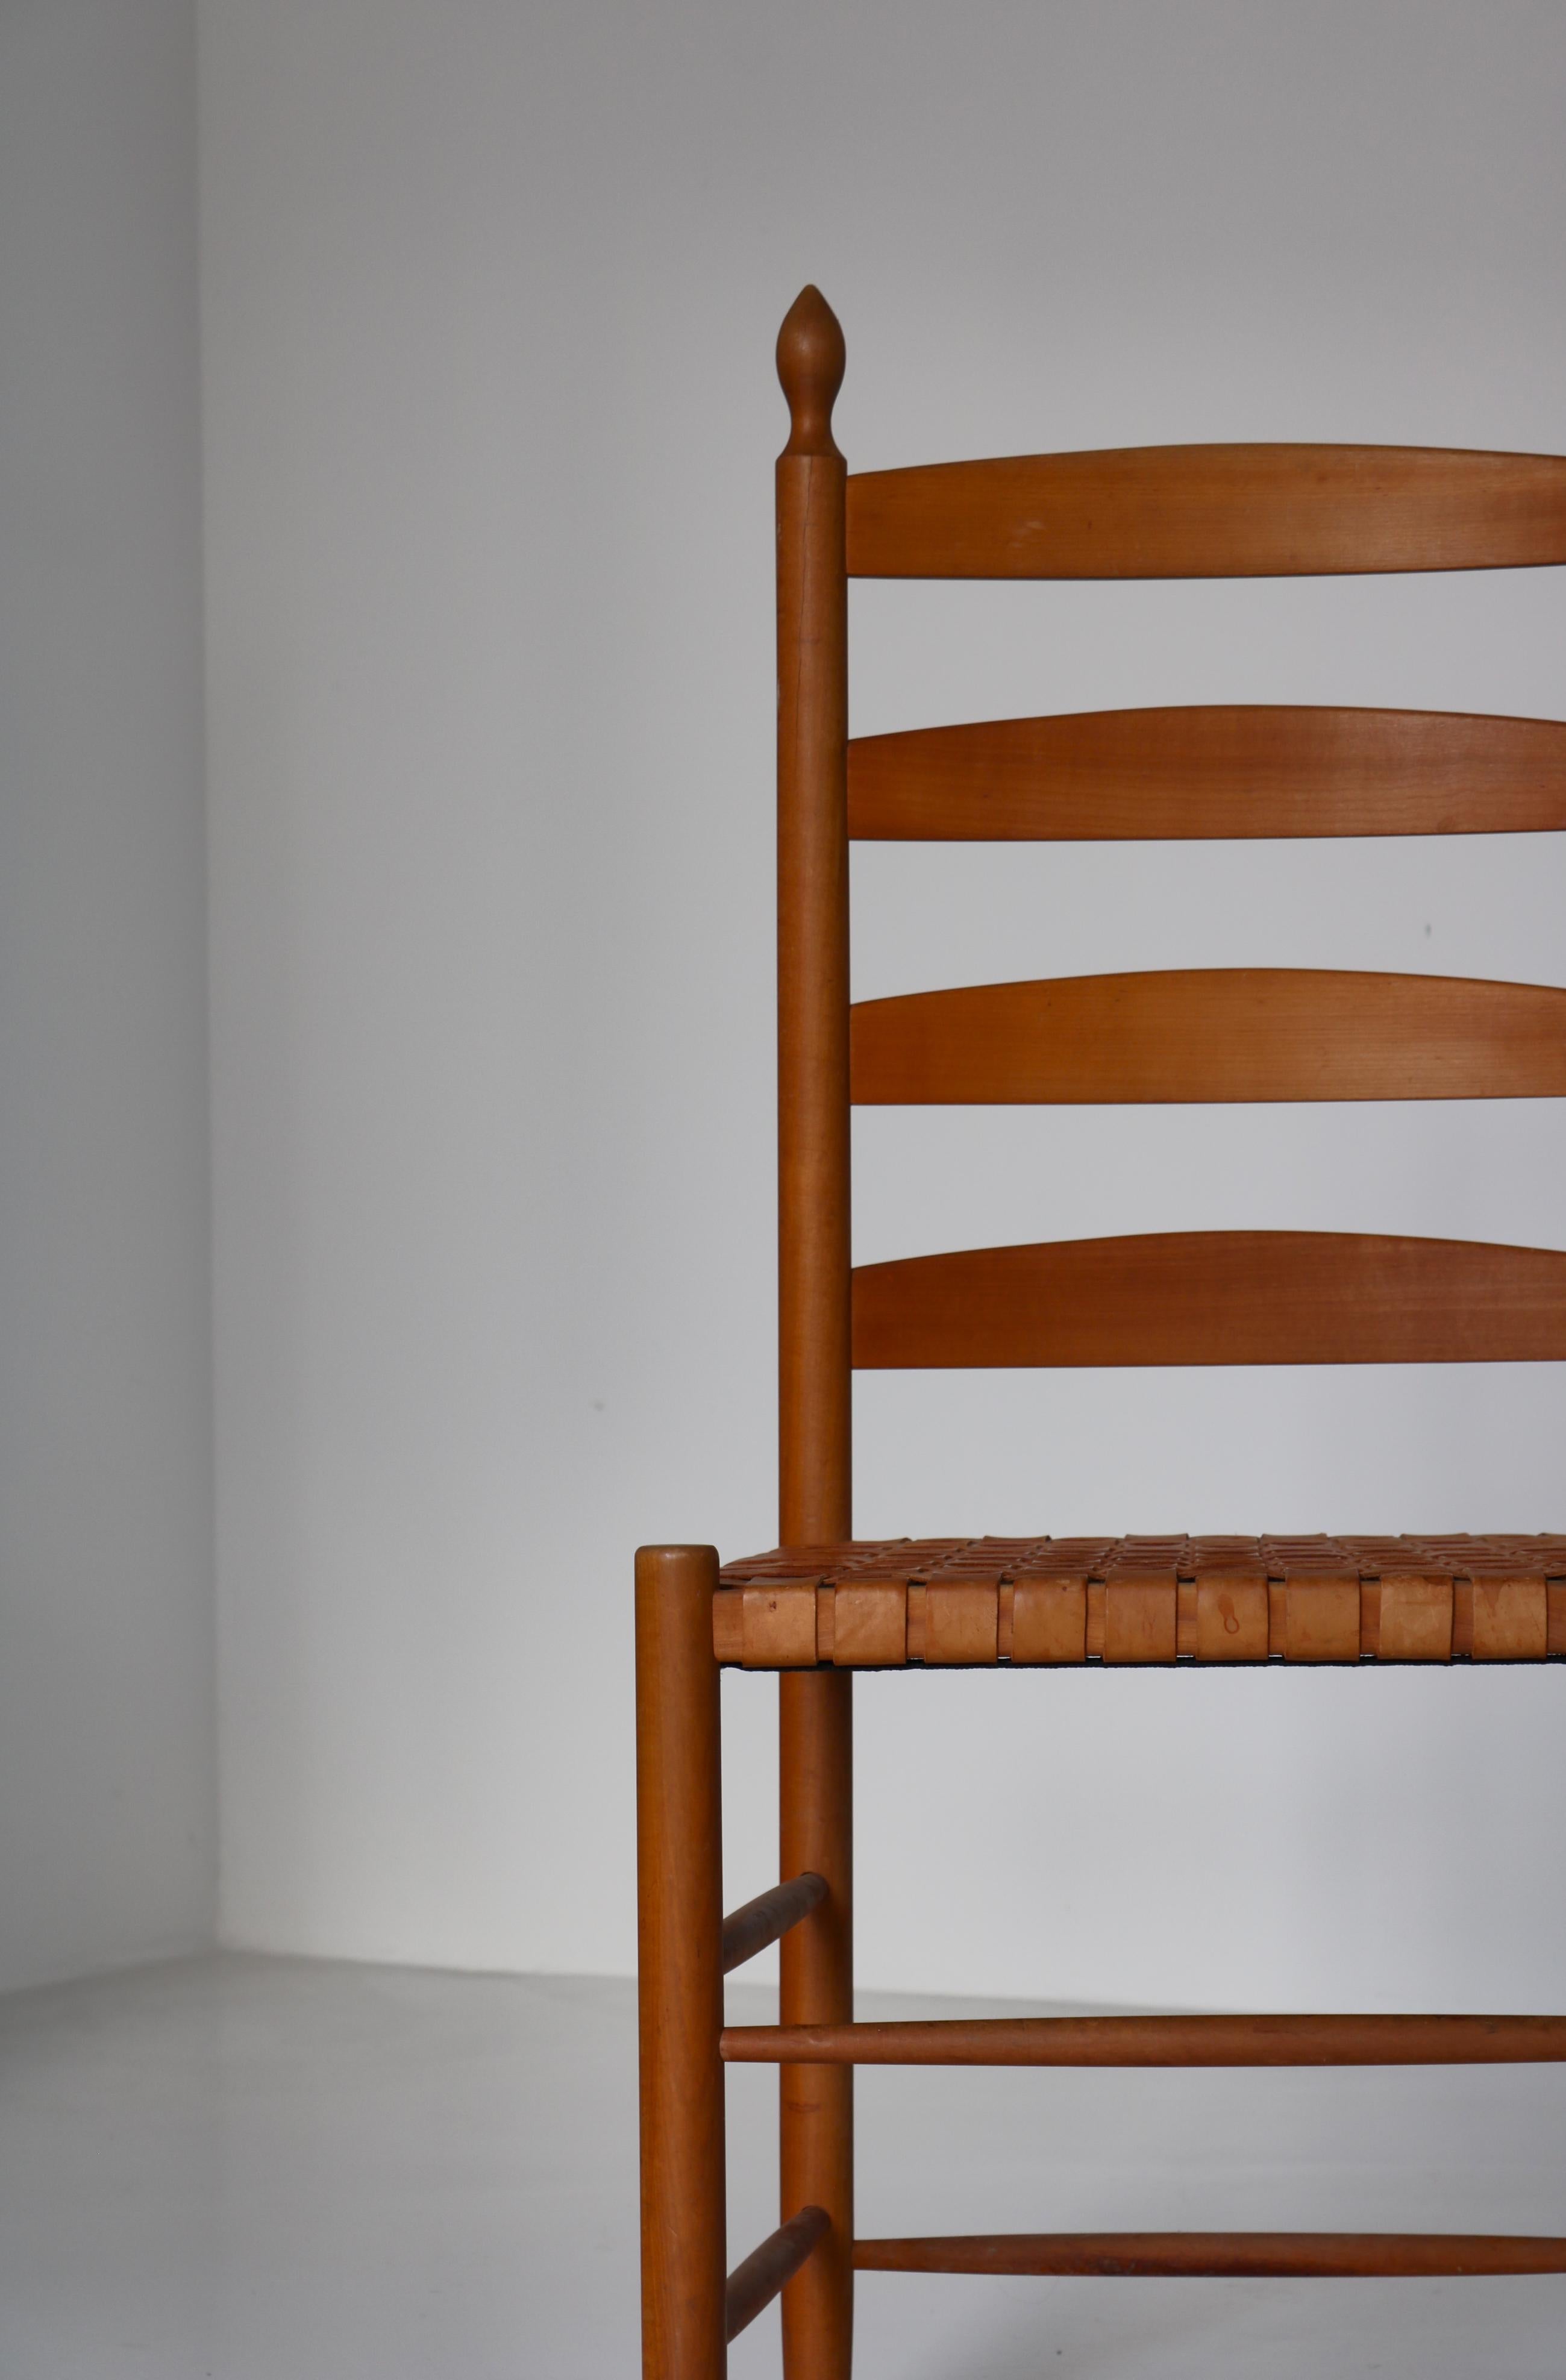 Vintage Scandinavian Shaker Chair in Beech and Leather Seat, Denmark, 1960s For Sale 8